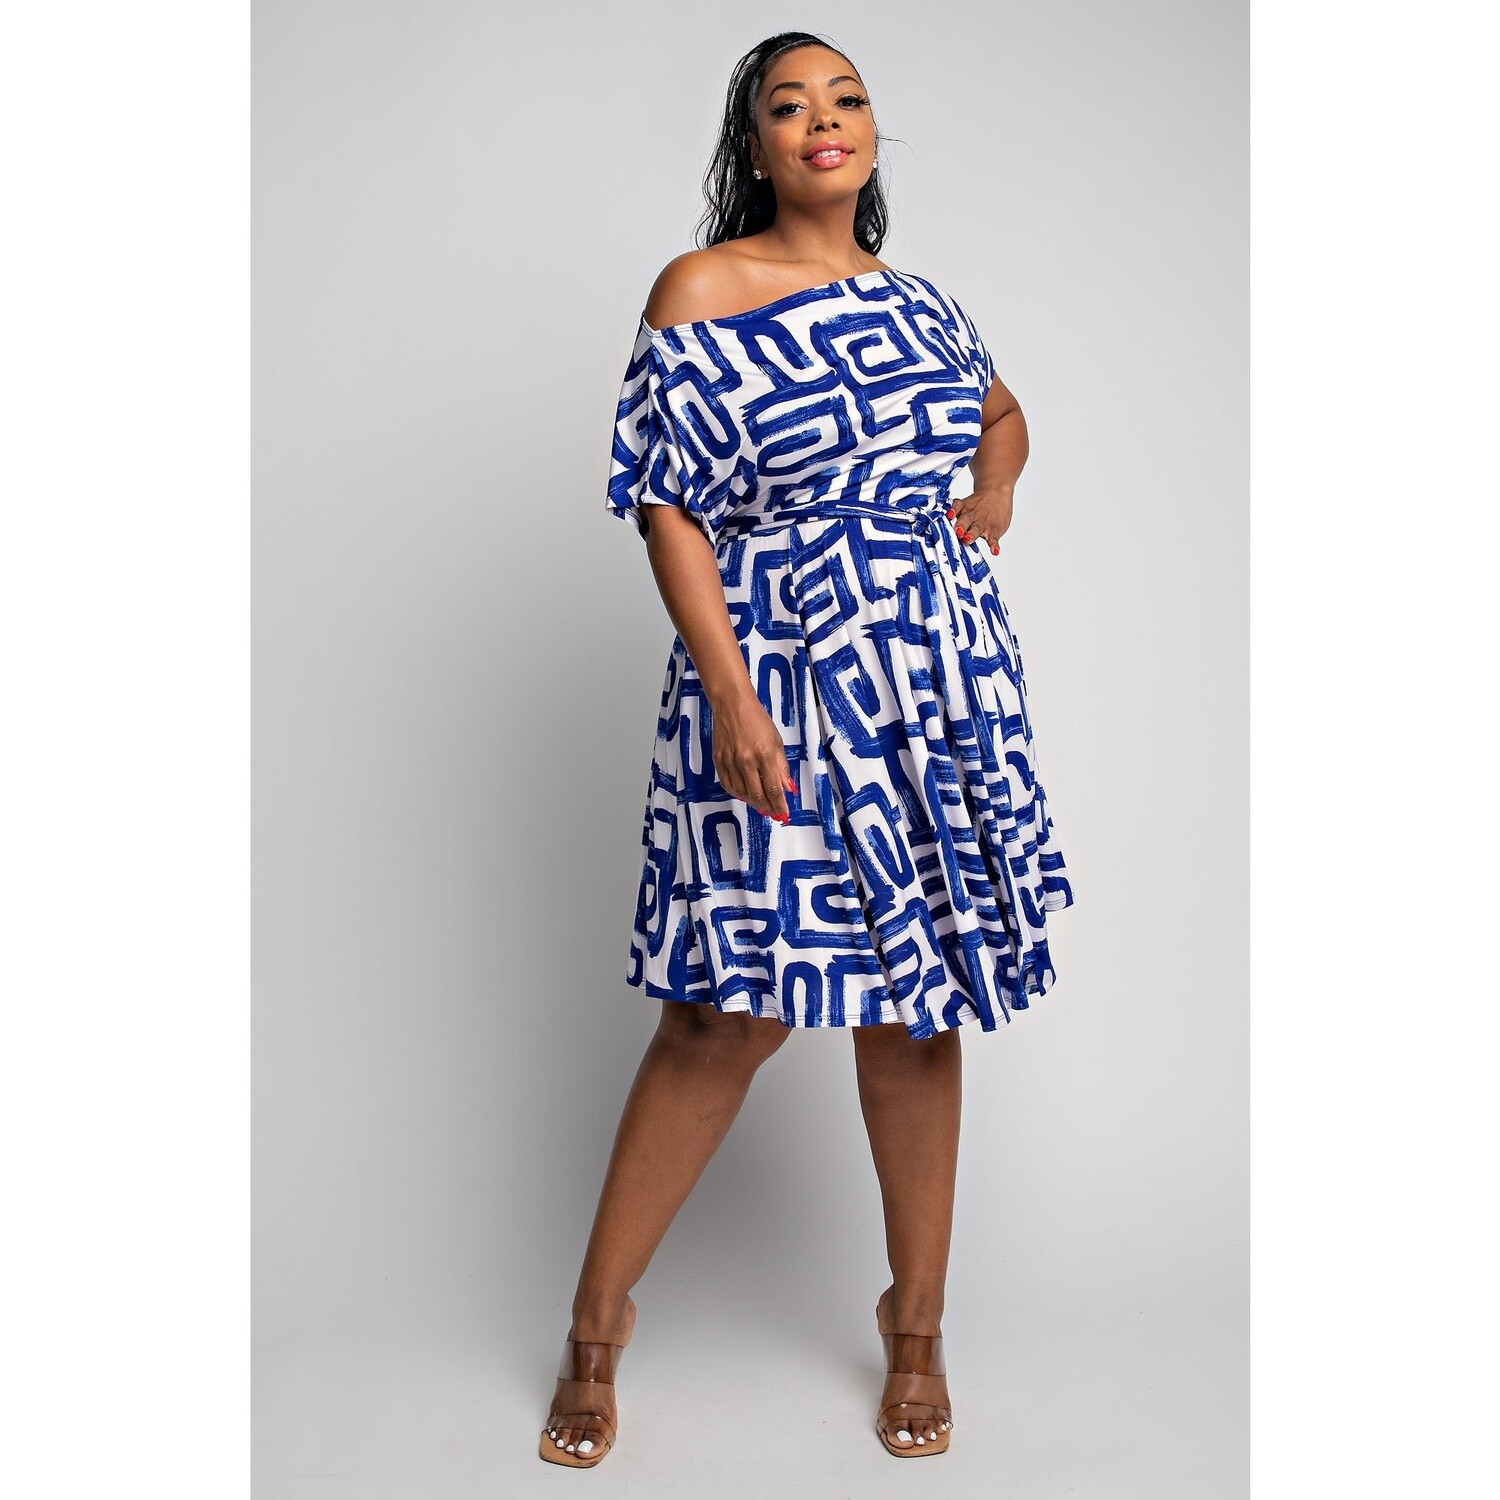 Plus Size Short Sleeves Flare Dress With Self Tie